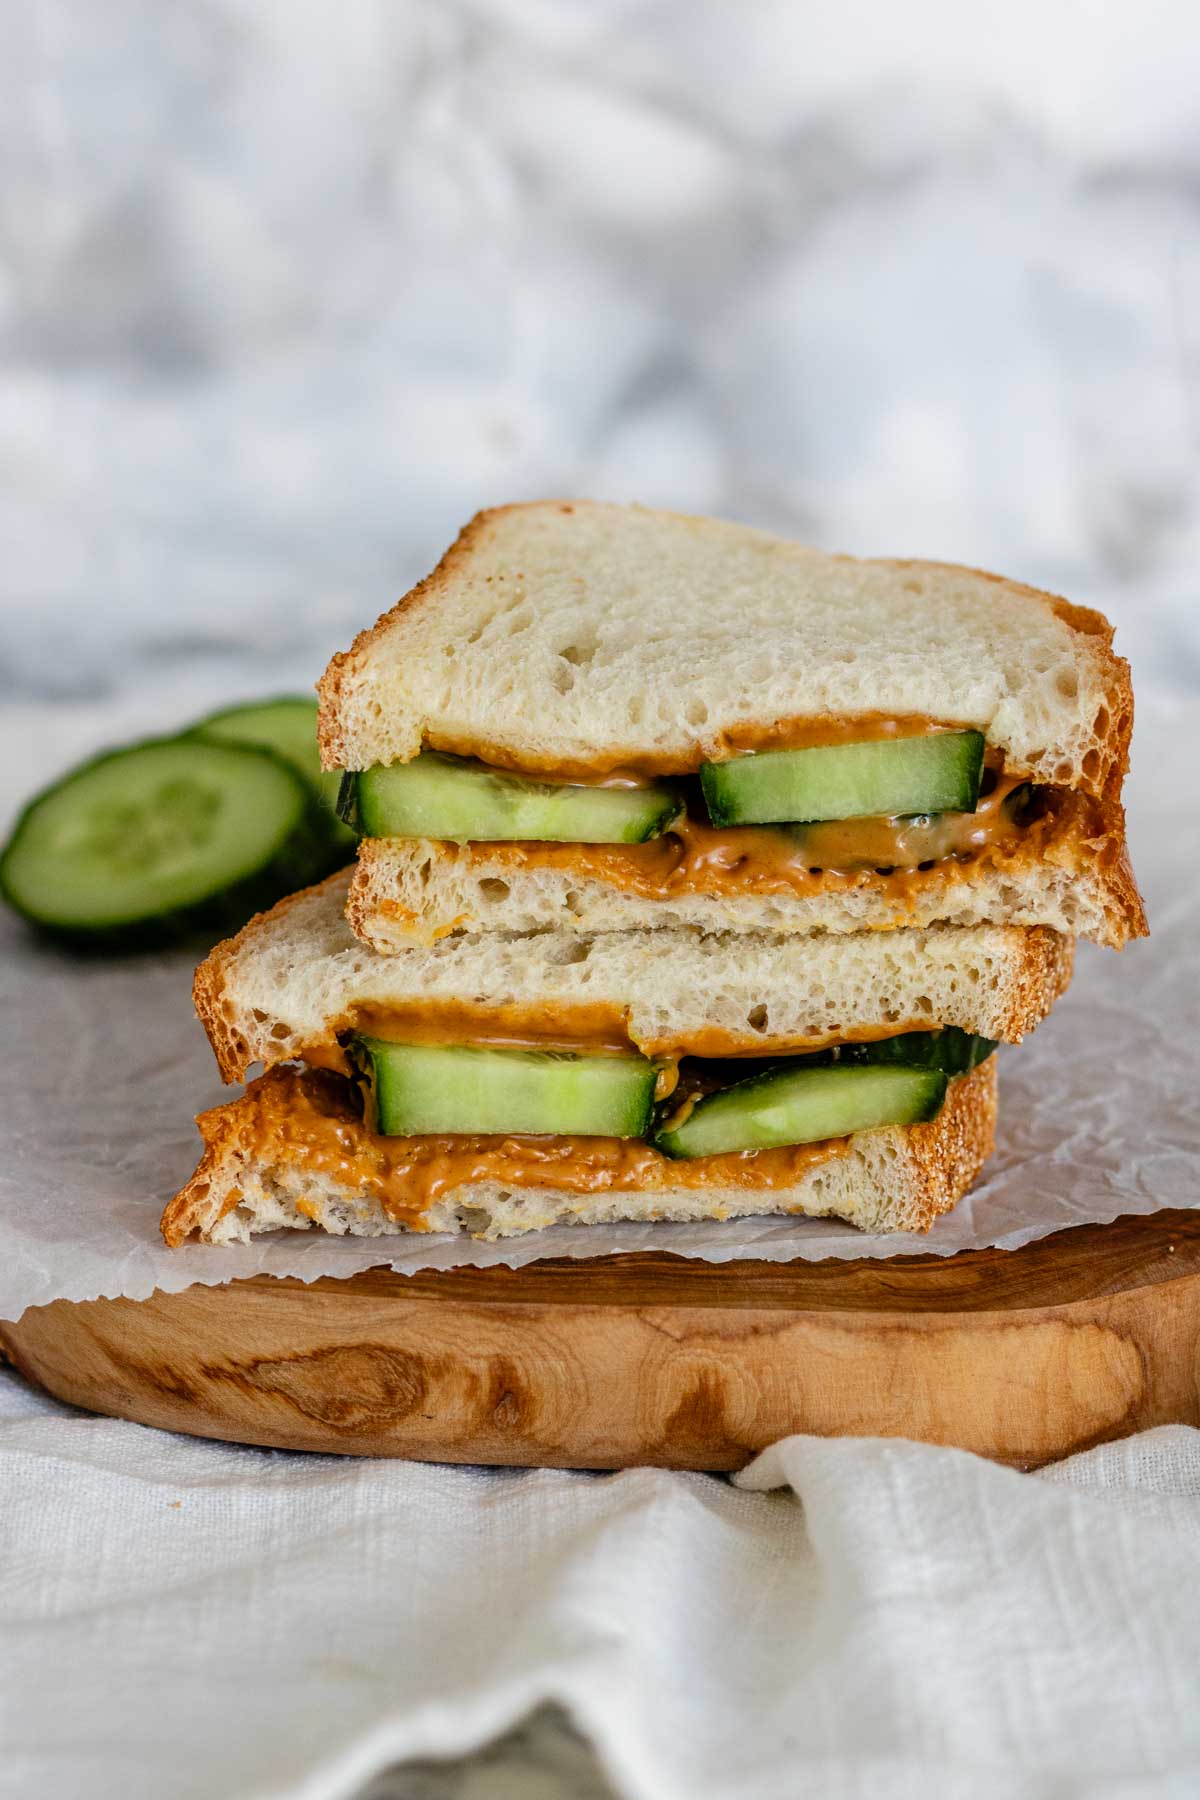 Peanut butter cucumber sandwich cut in half on parchment paper and a wooden board.